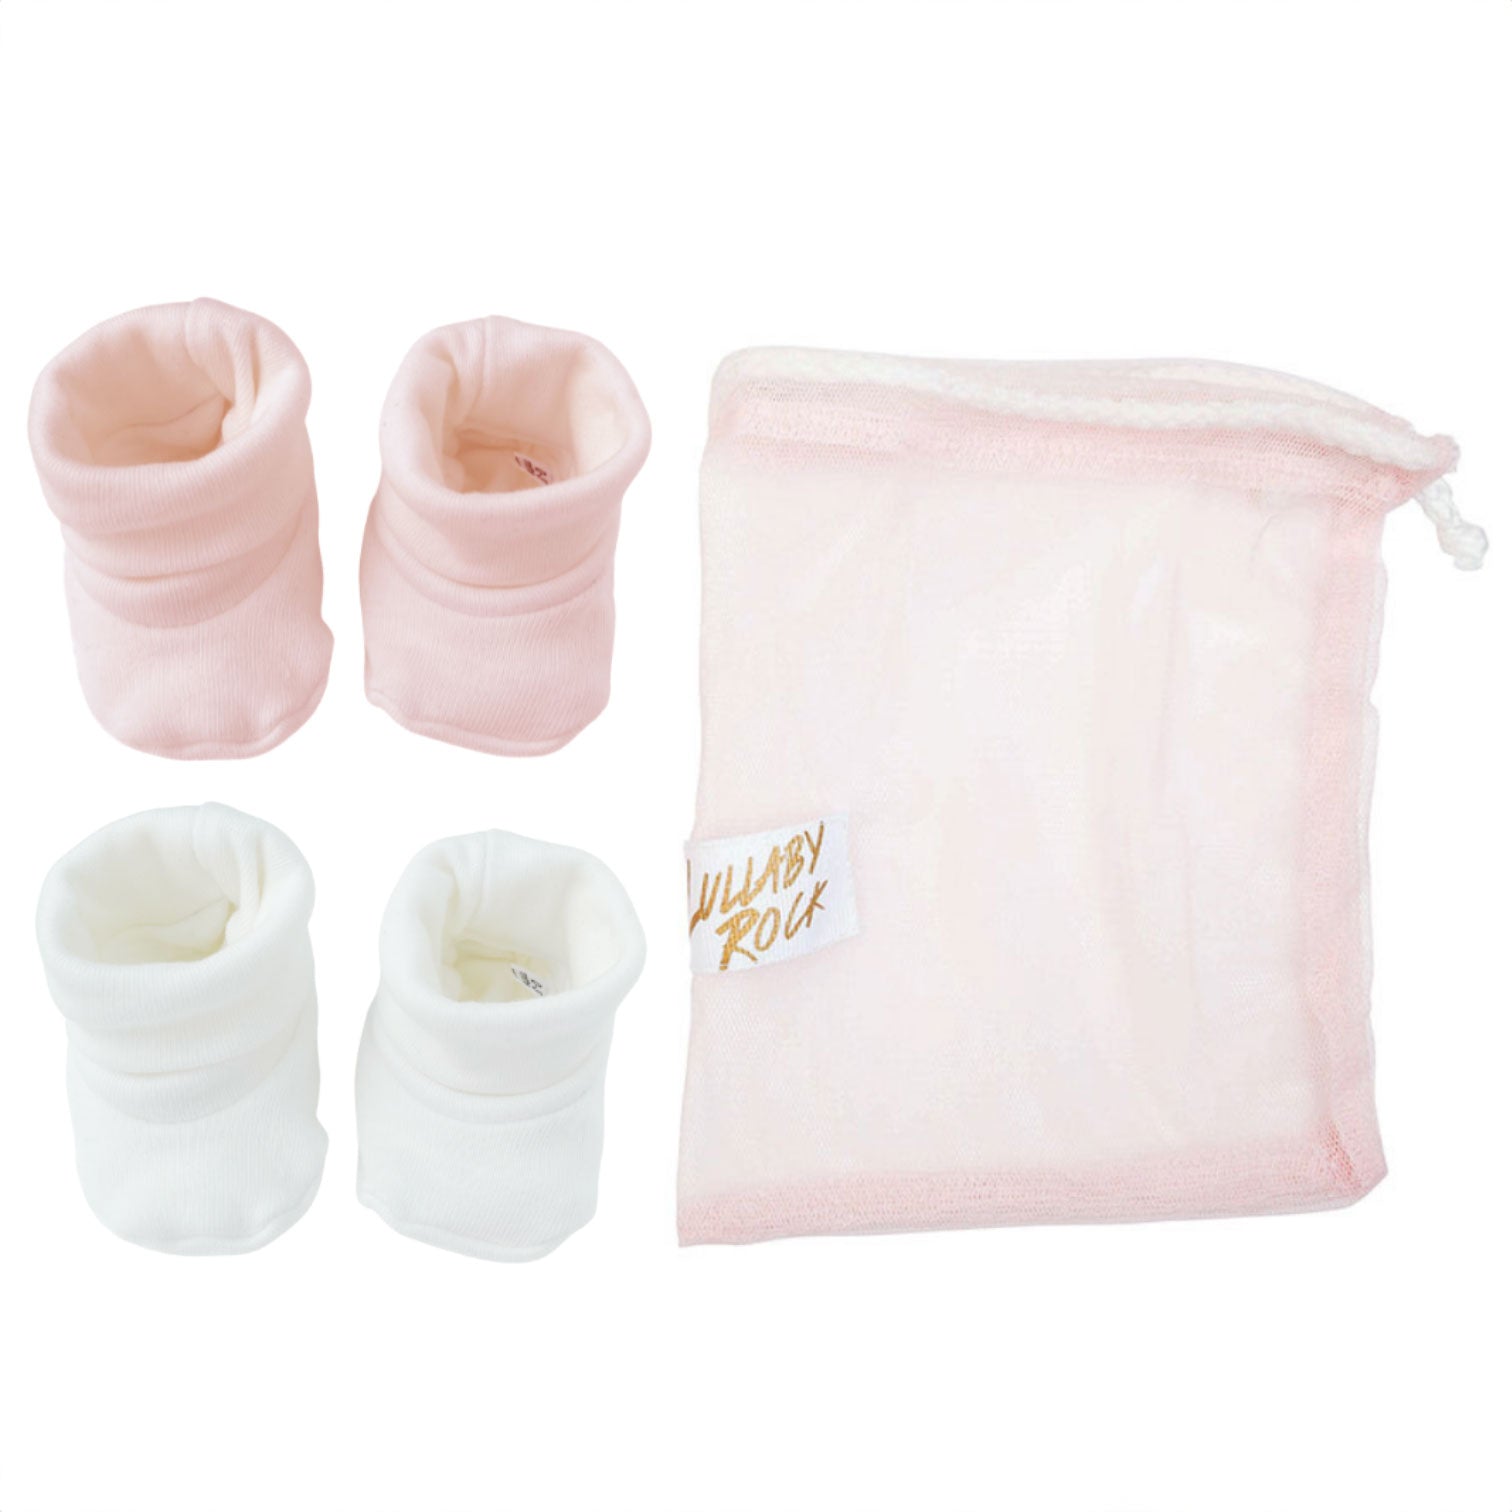 Ribbed Booty Giftset: 2 Sets of Booties & Drawstring Bag – 3 Colourways